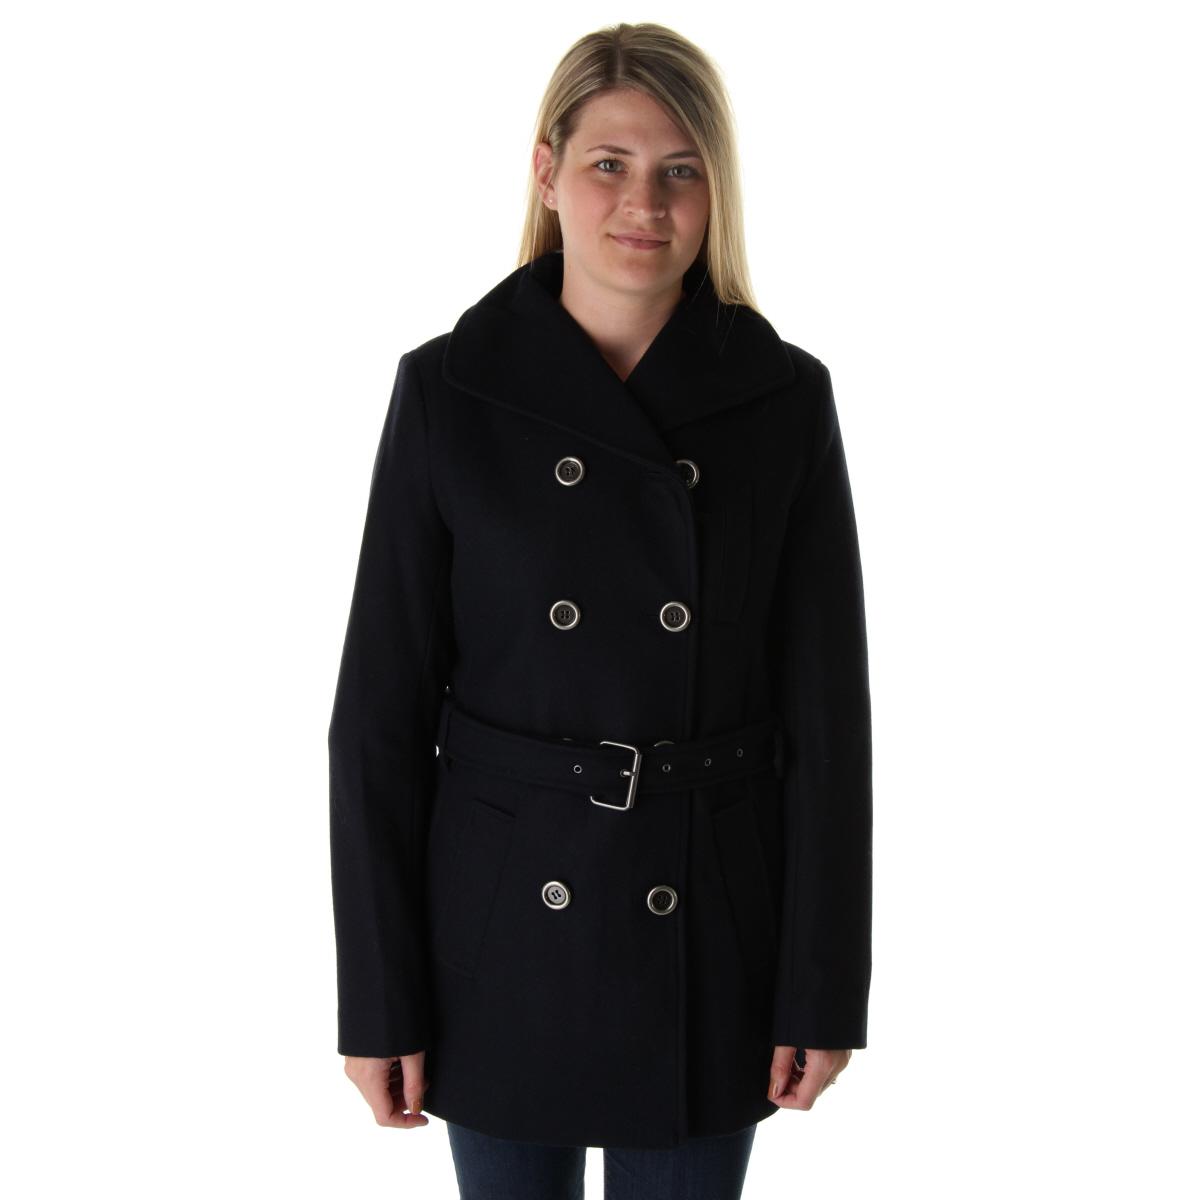 Nine West 0829 Womens Wool Blend Double Breasted Outerwear Pea Coat ...